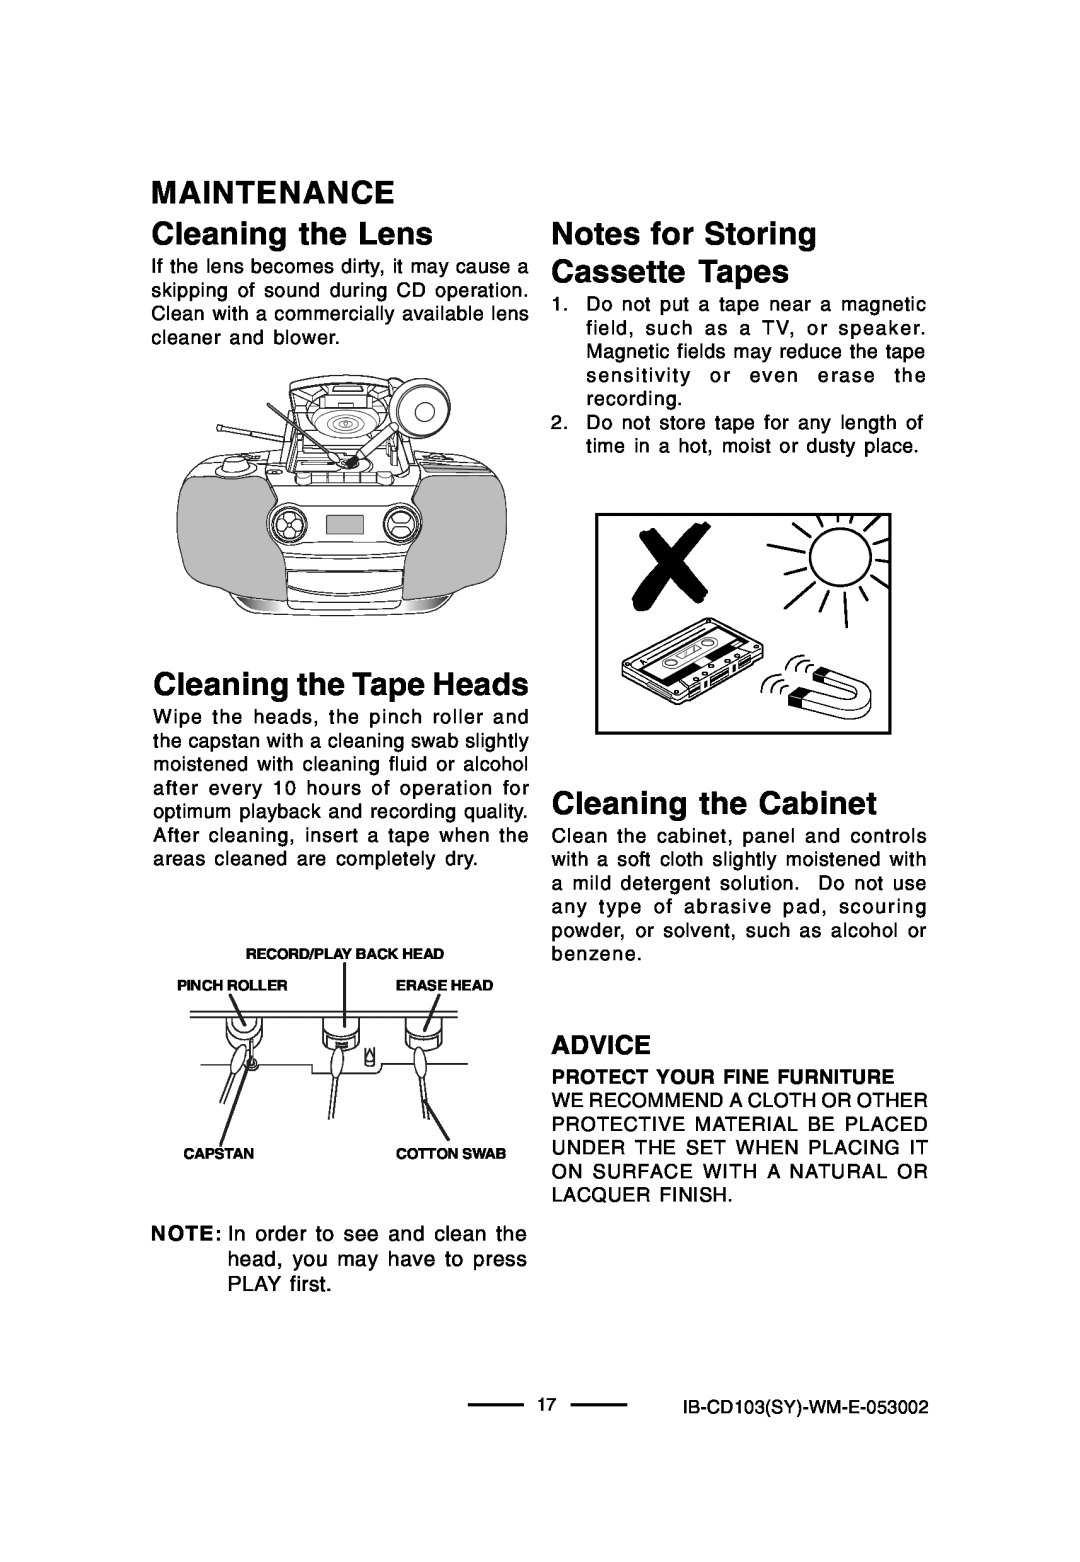 Lenoxx Electronics CD-103 MAINTENANCE Cleaning the Lens, Cleaning the Tape Heads, Notes for Storing Cassette Tapes, Advice 